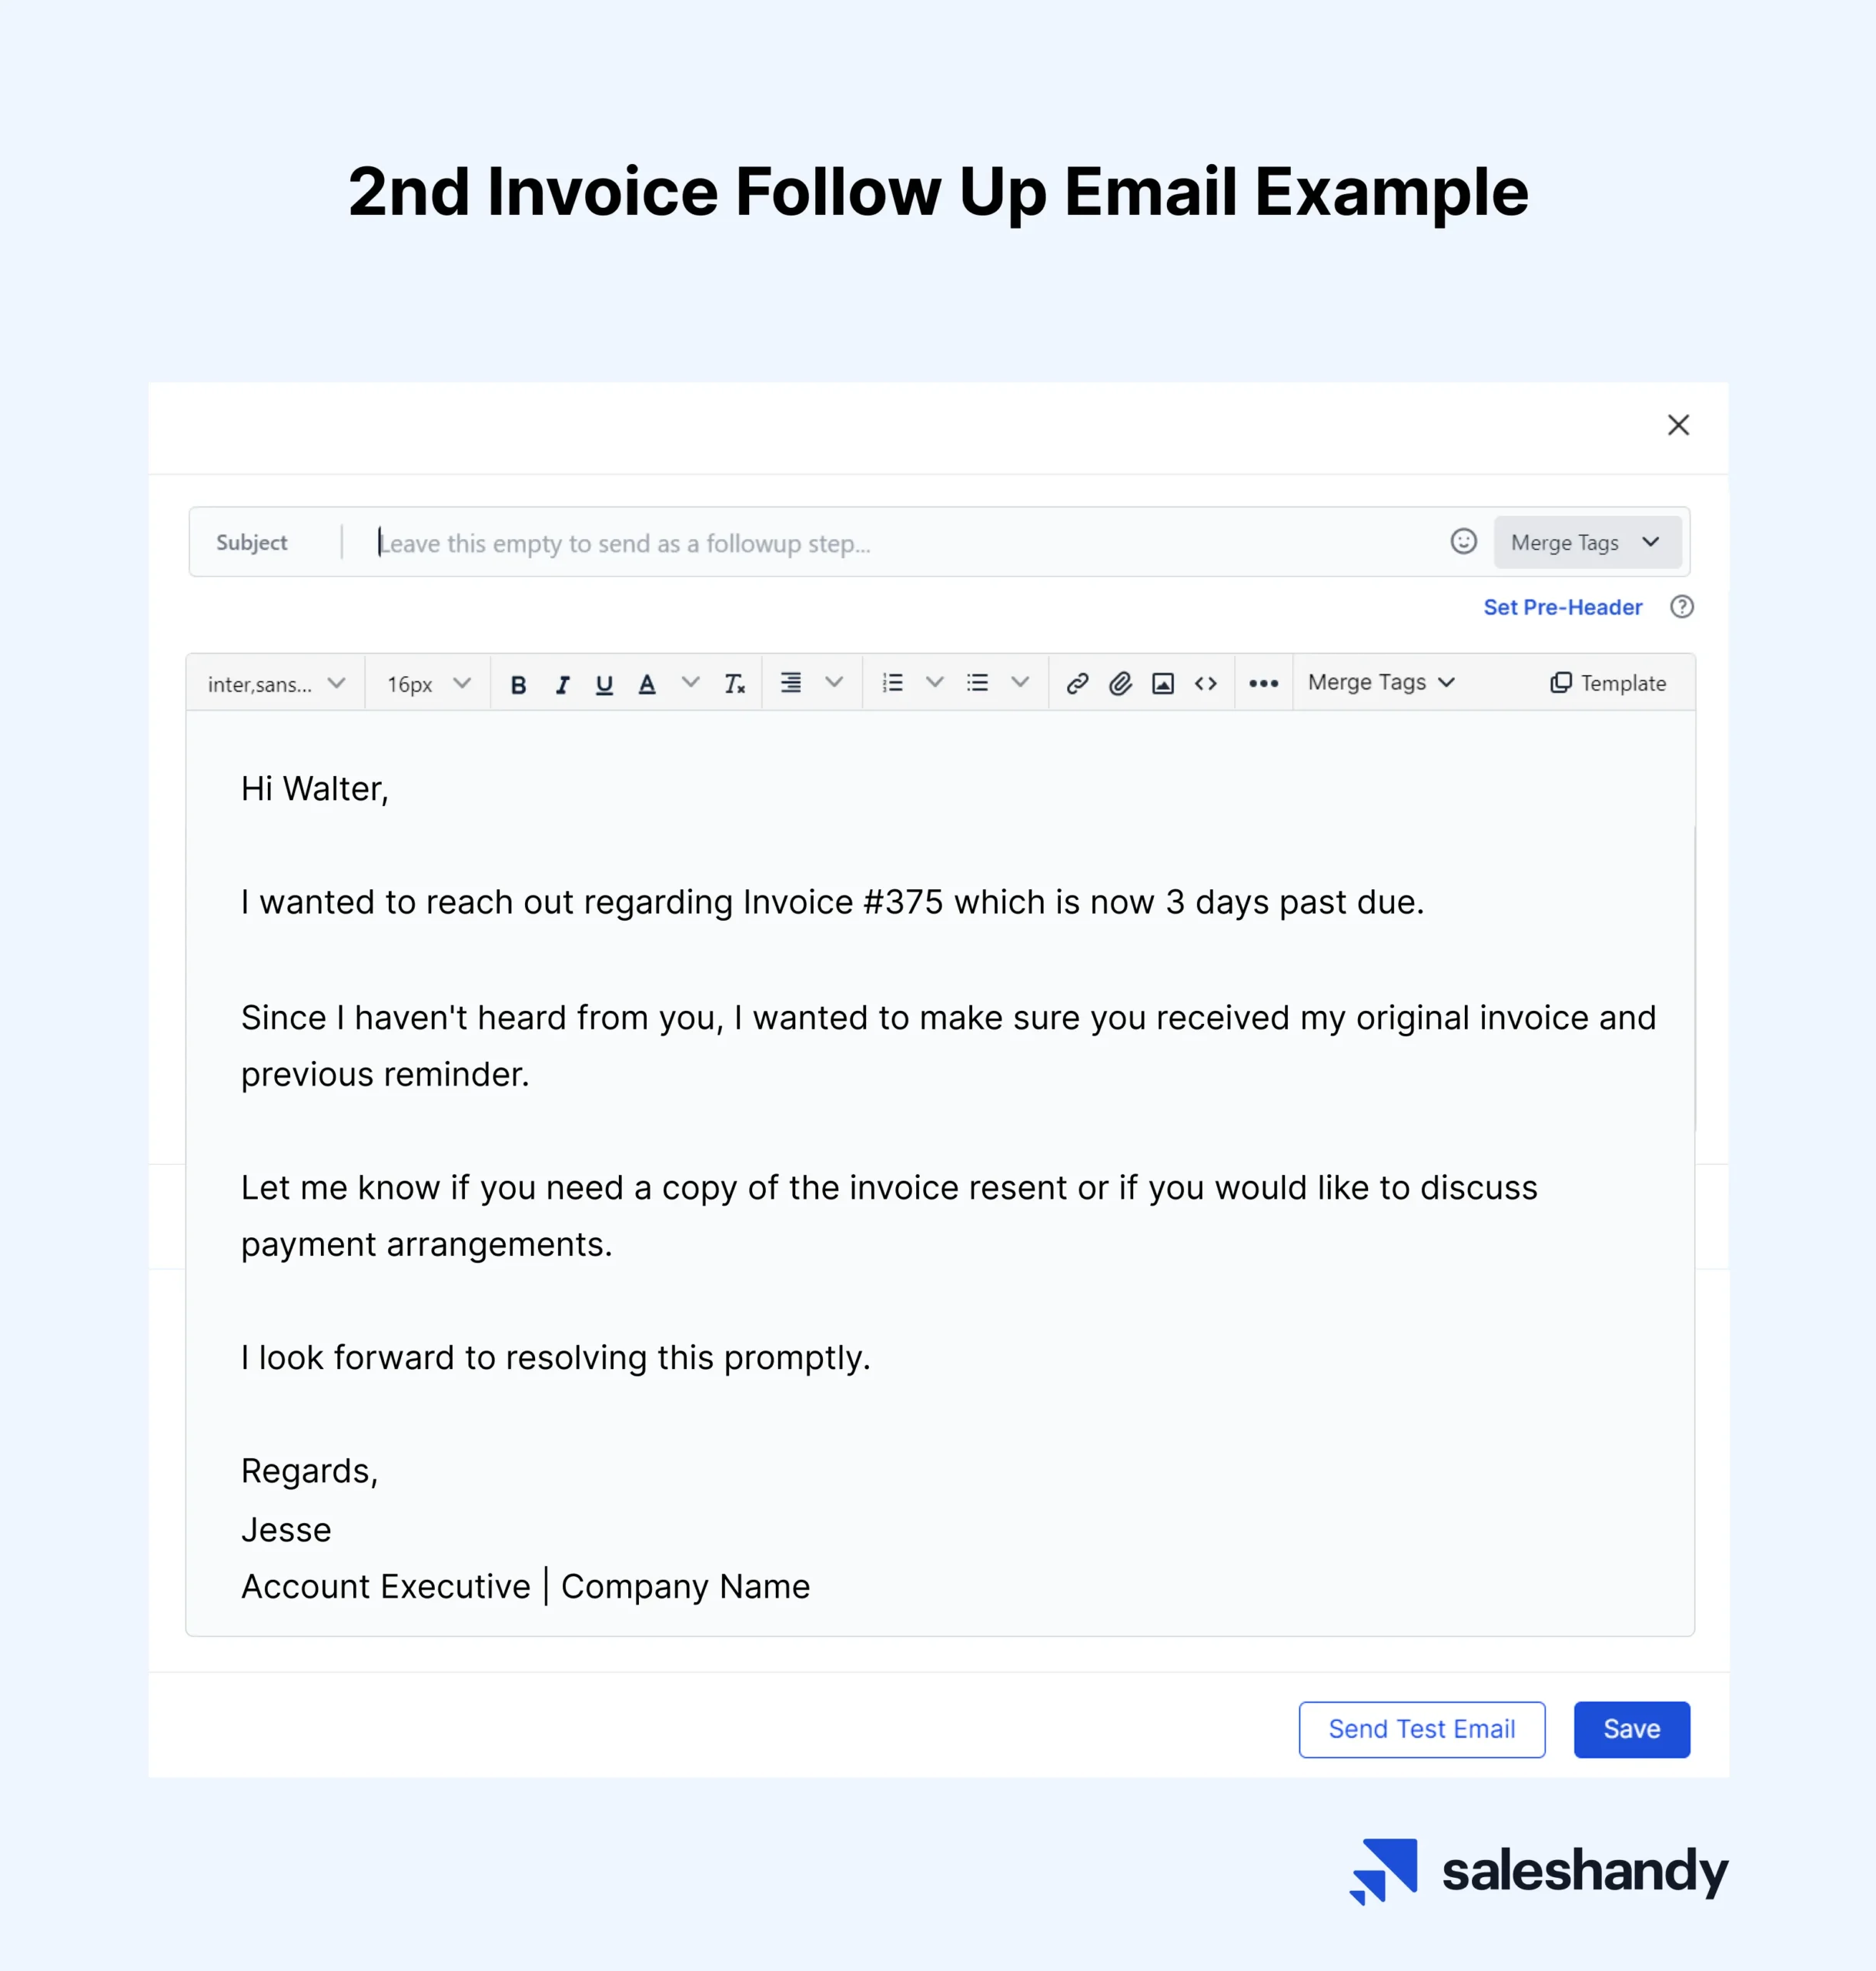 2nd Invoice Follow Up Email Example